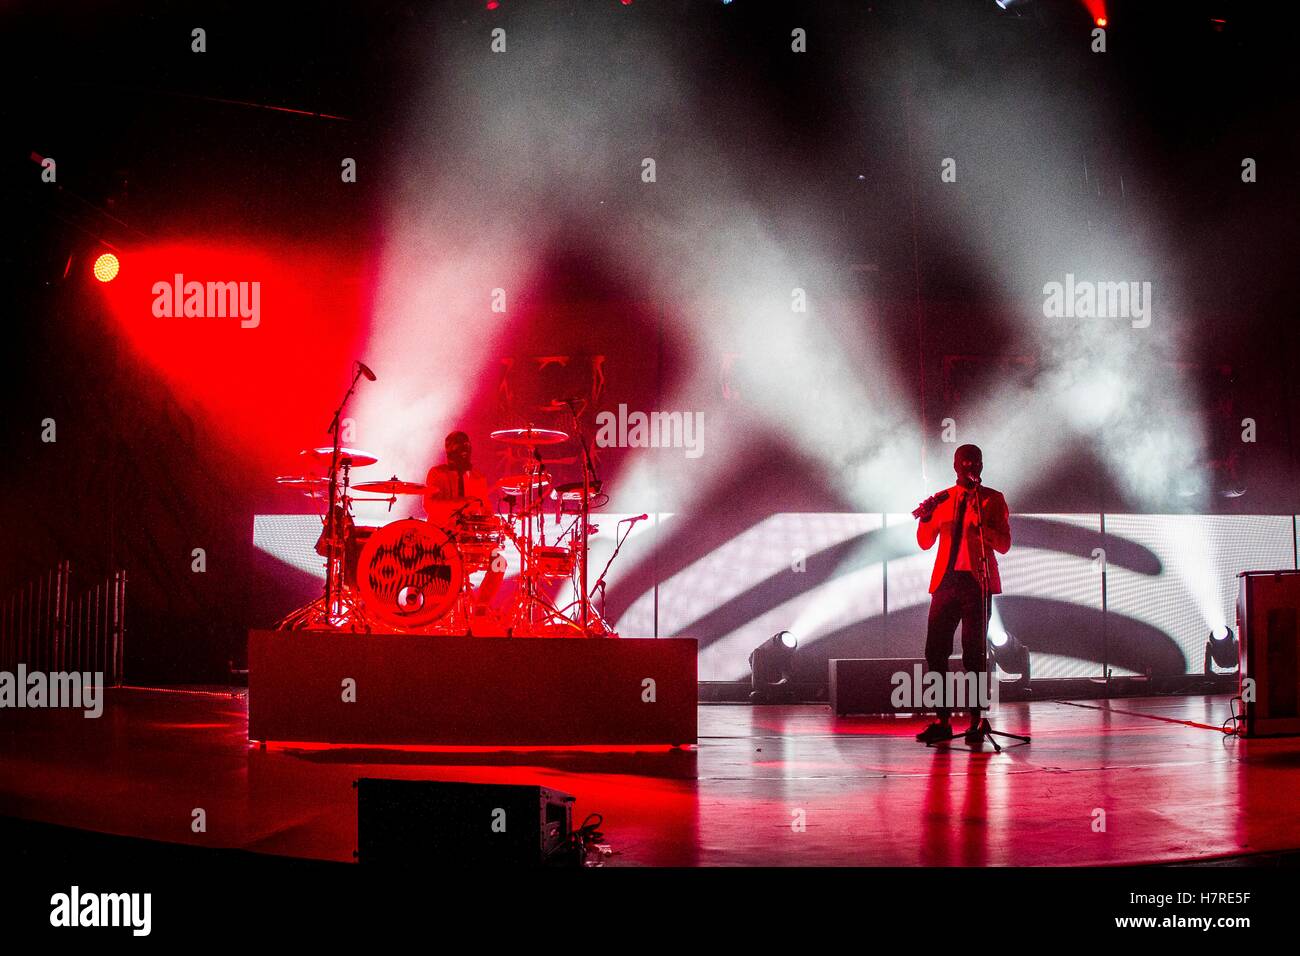 Milan, Italy. 07th Nov, 2016. the american musical duo Twenty One Pilot pictured on stage as they perform at Mediolanum Forum in Assago Milan Italy. © Roberto Finizio/Pacific Press/Alamy Live News Stock Photo